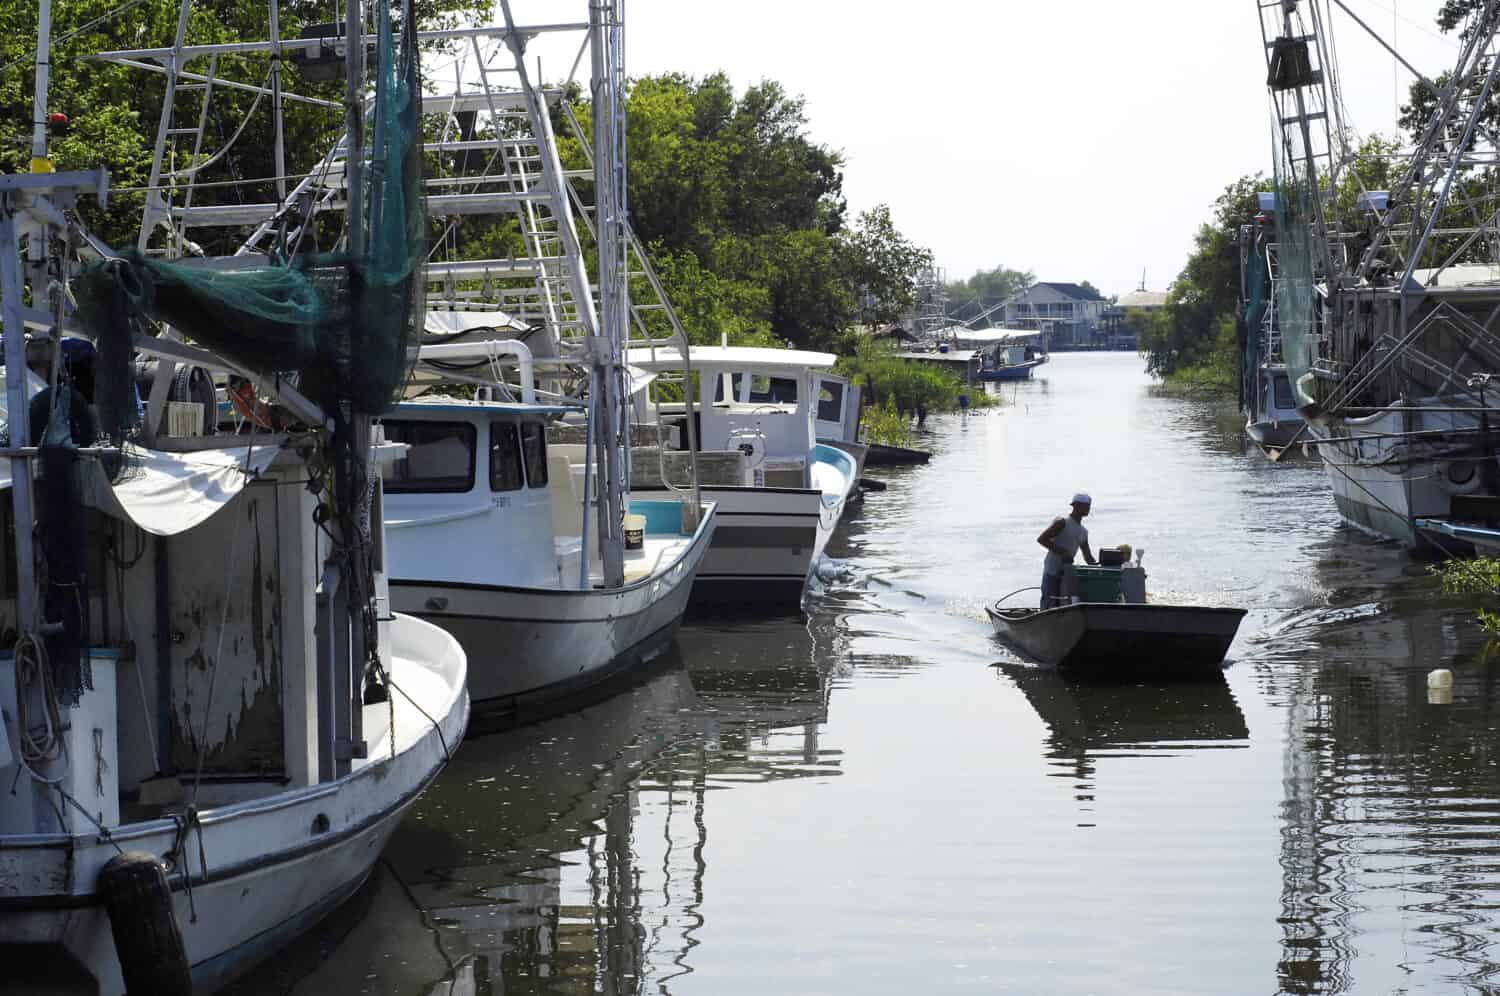 A lone fisherman poles a flatboat along a canal in Lafitte, Louisiana, lined with shrimp boats.